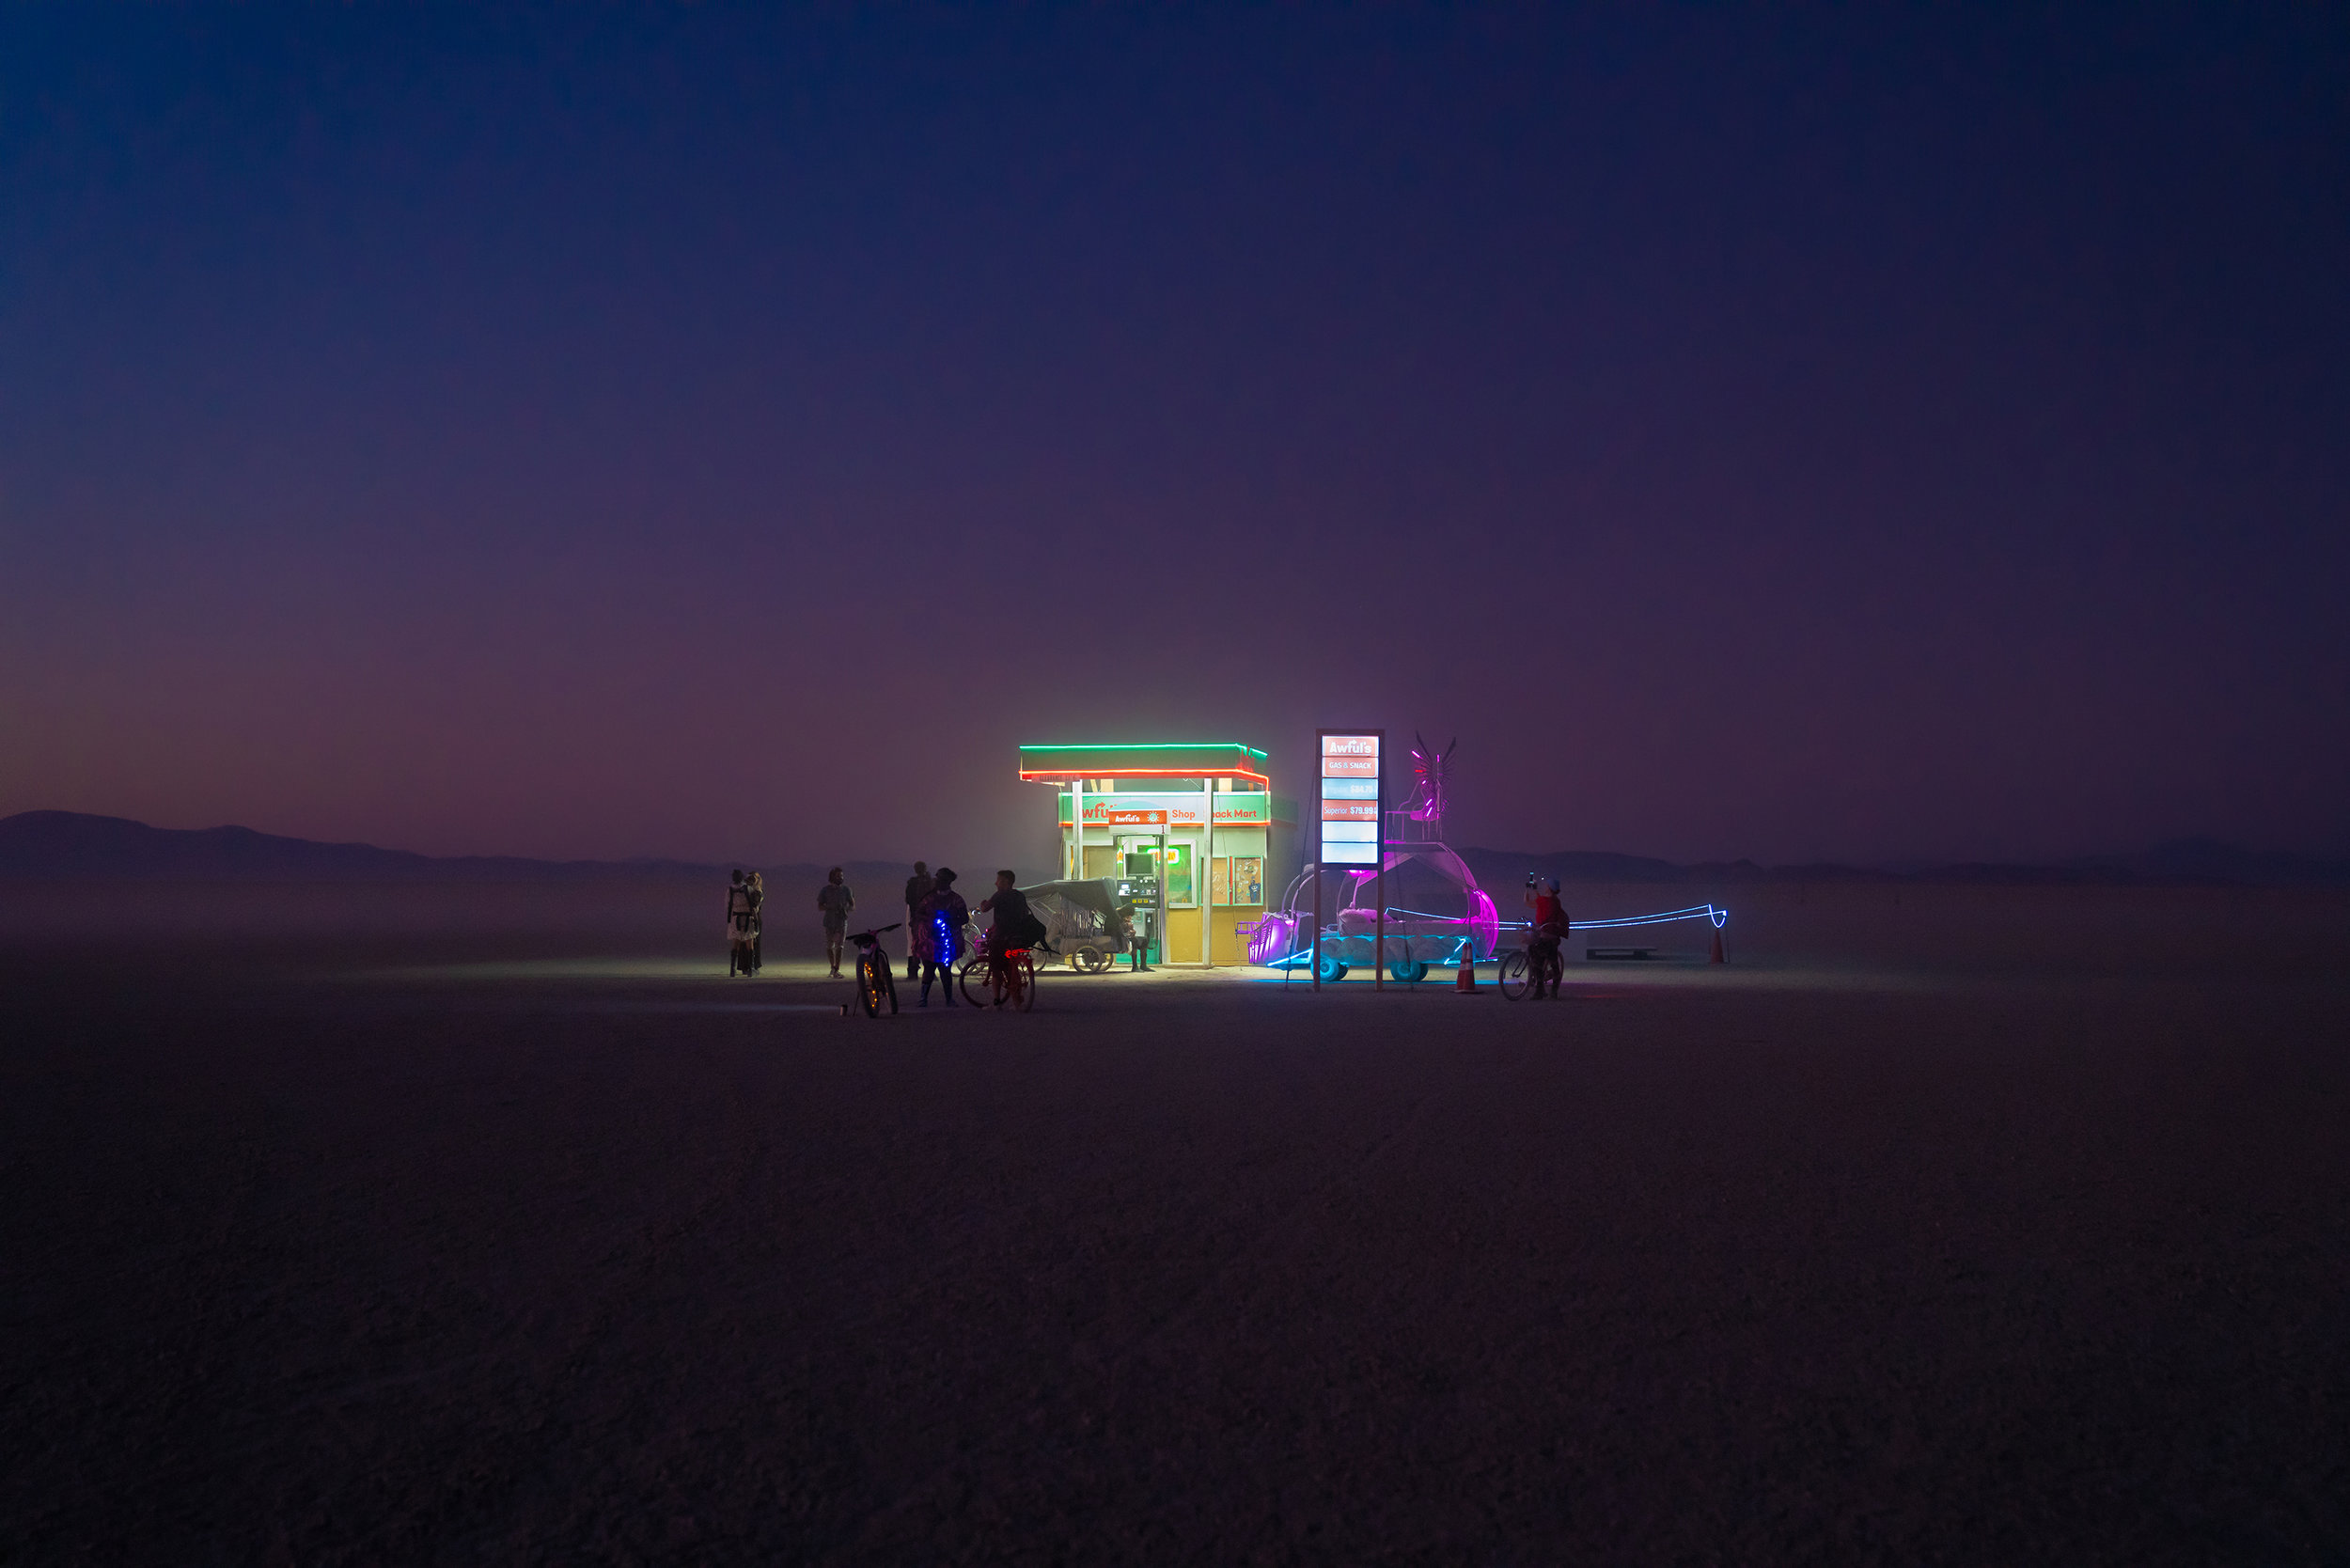 Burning Man 2019 - Awful's Gas & Snack - Last gas station in the universe